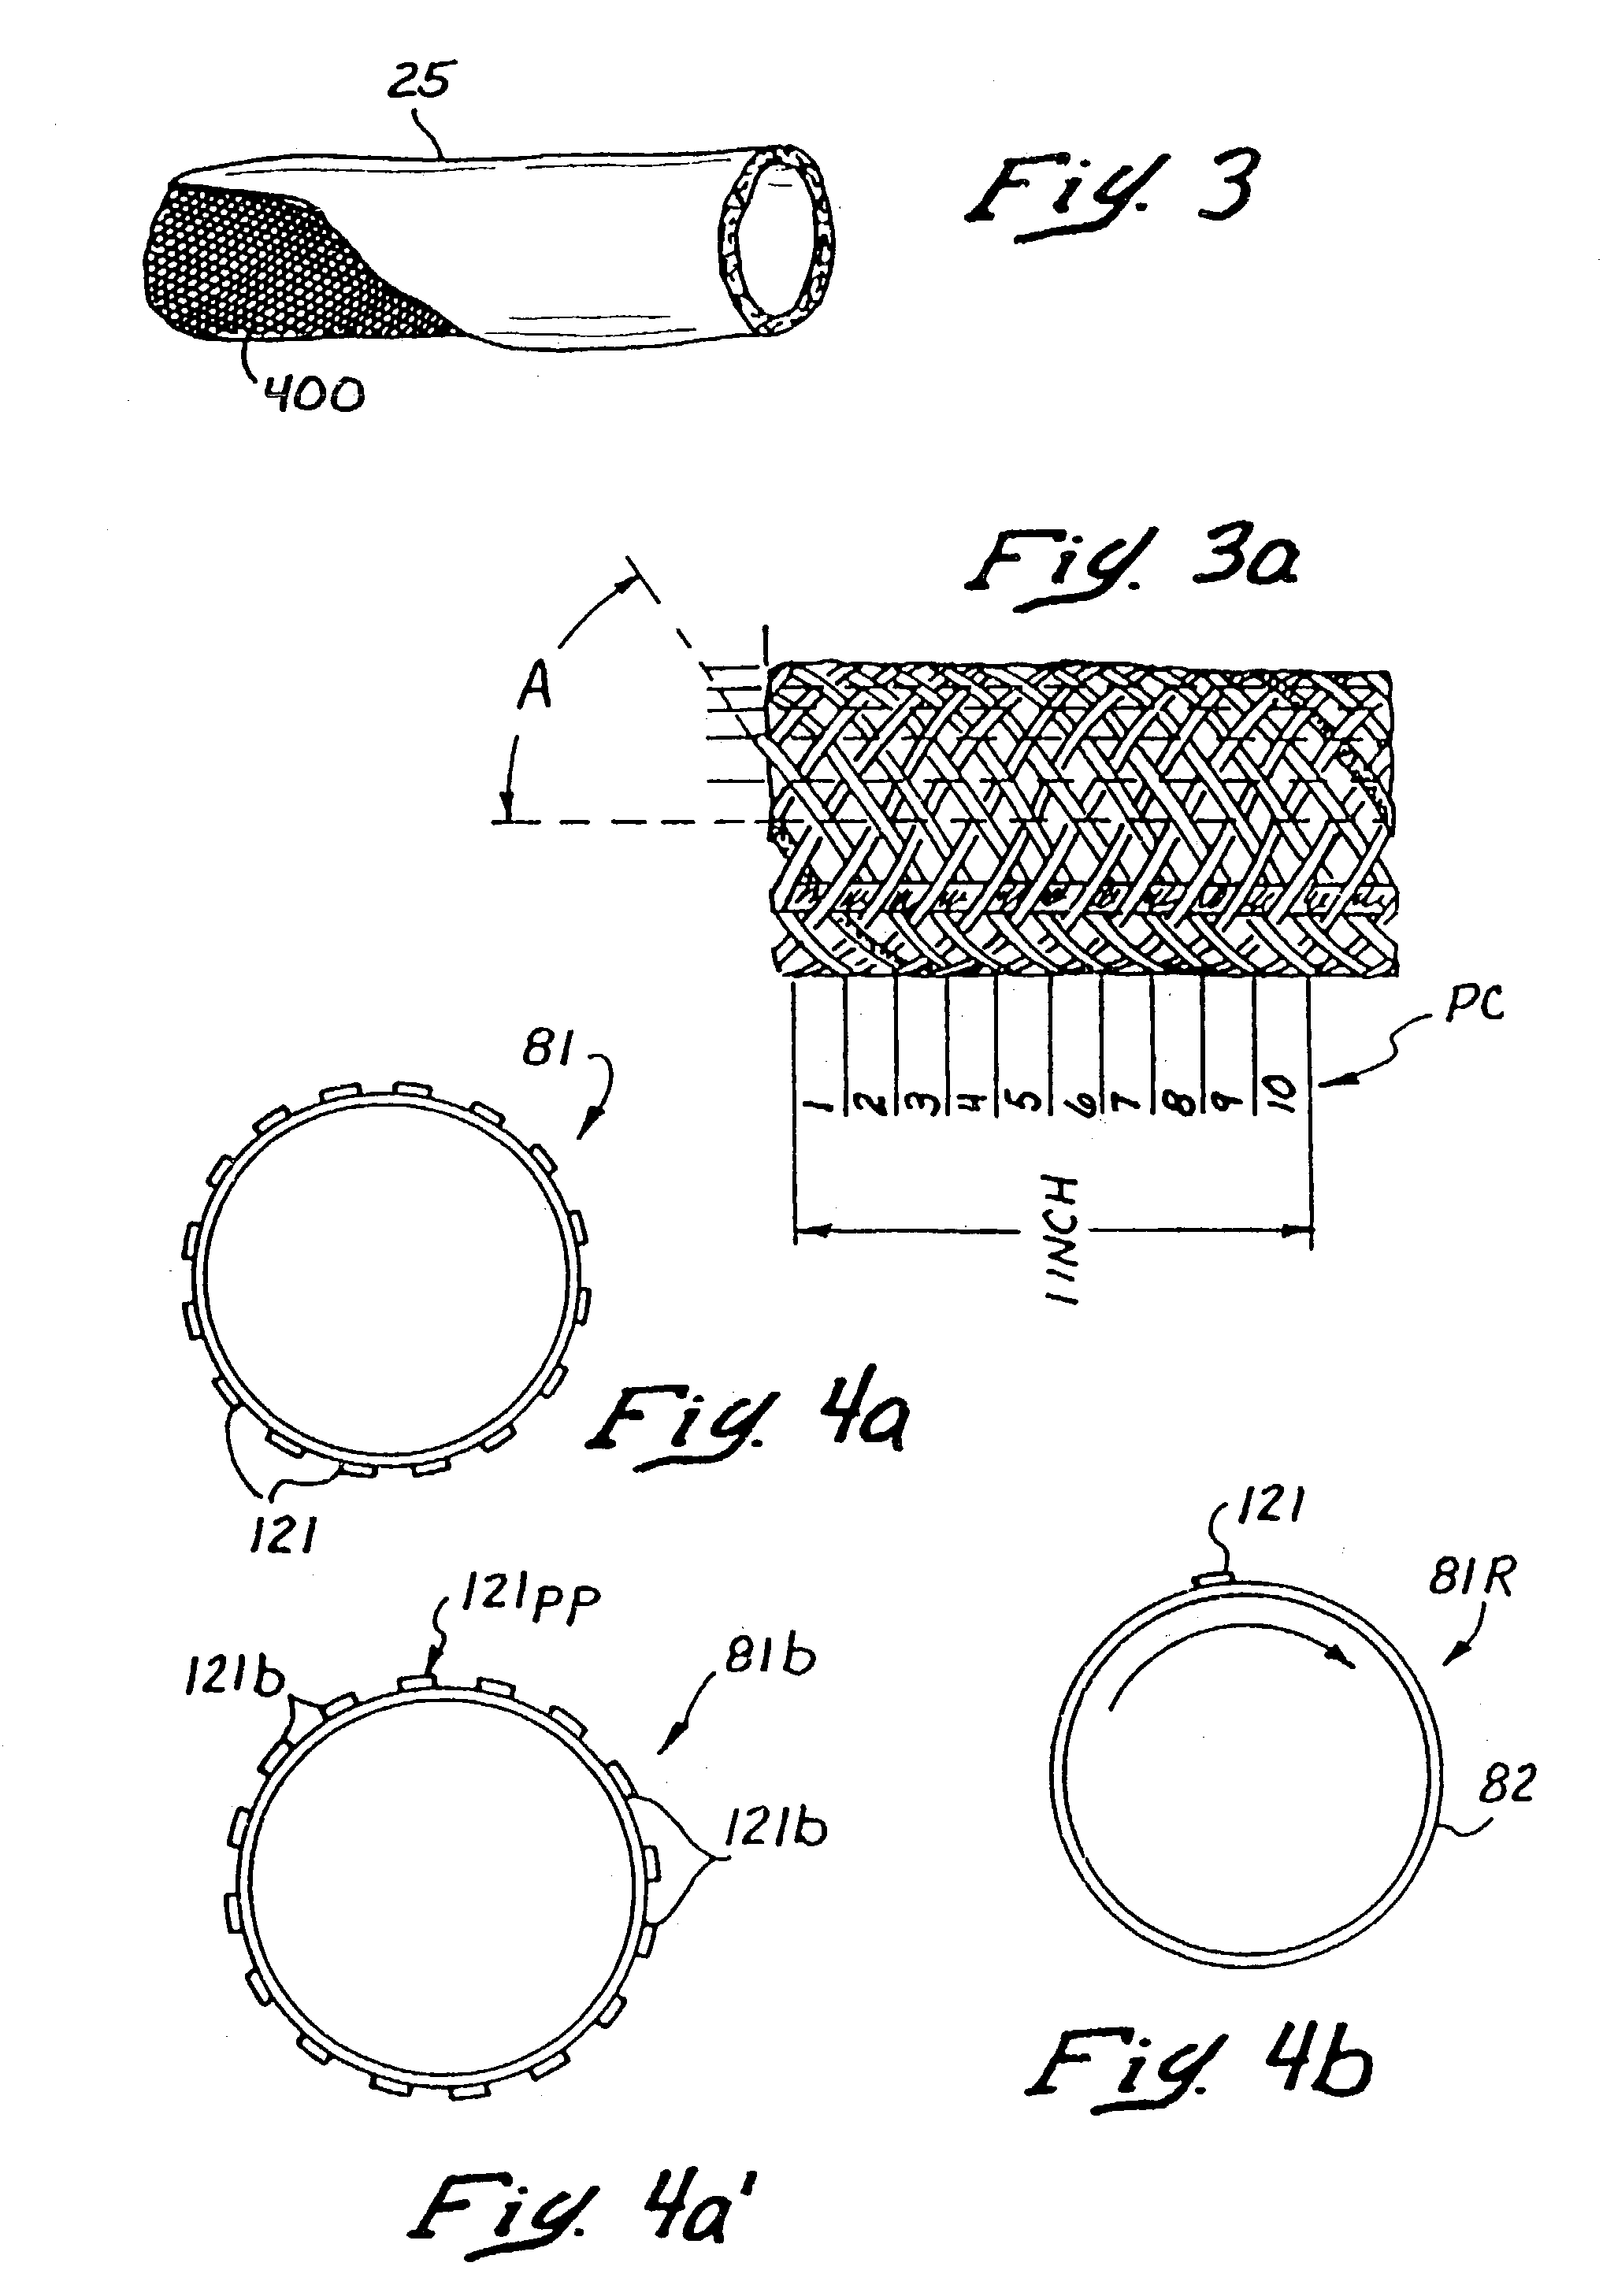 Methods for bypassing total or near-total obstructions in arteries or other anatomical conduits